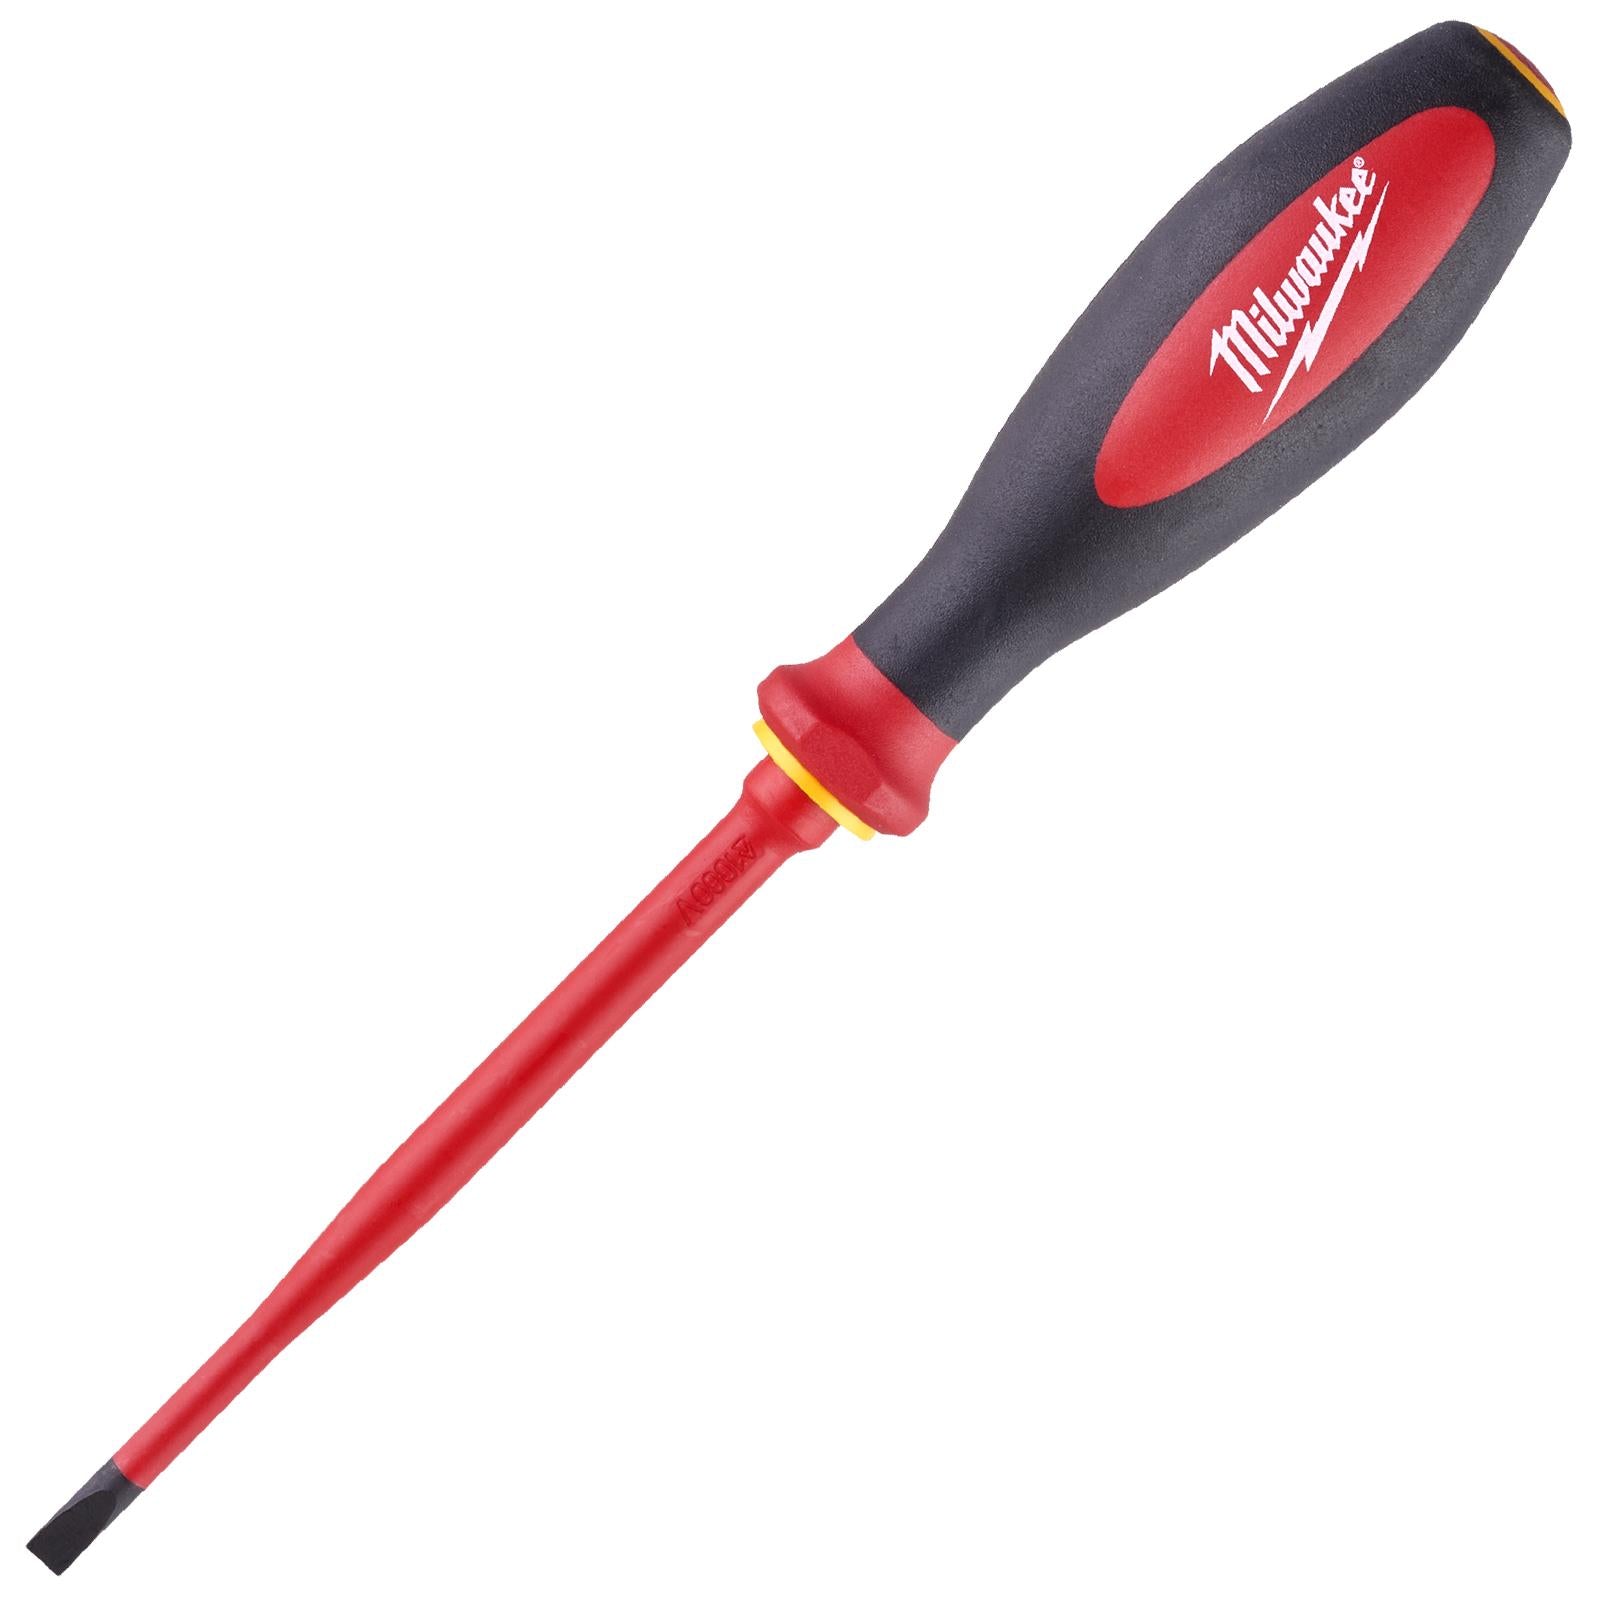 Milwaukee VDE Slim Screwdriver Slotted 1.0mm x 5.5mm x 125mm